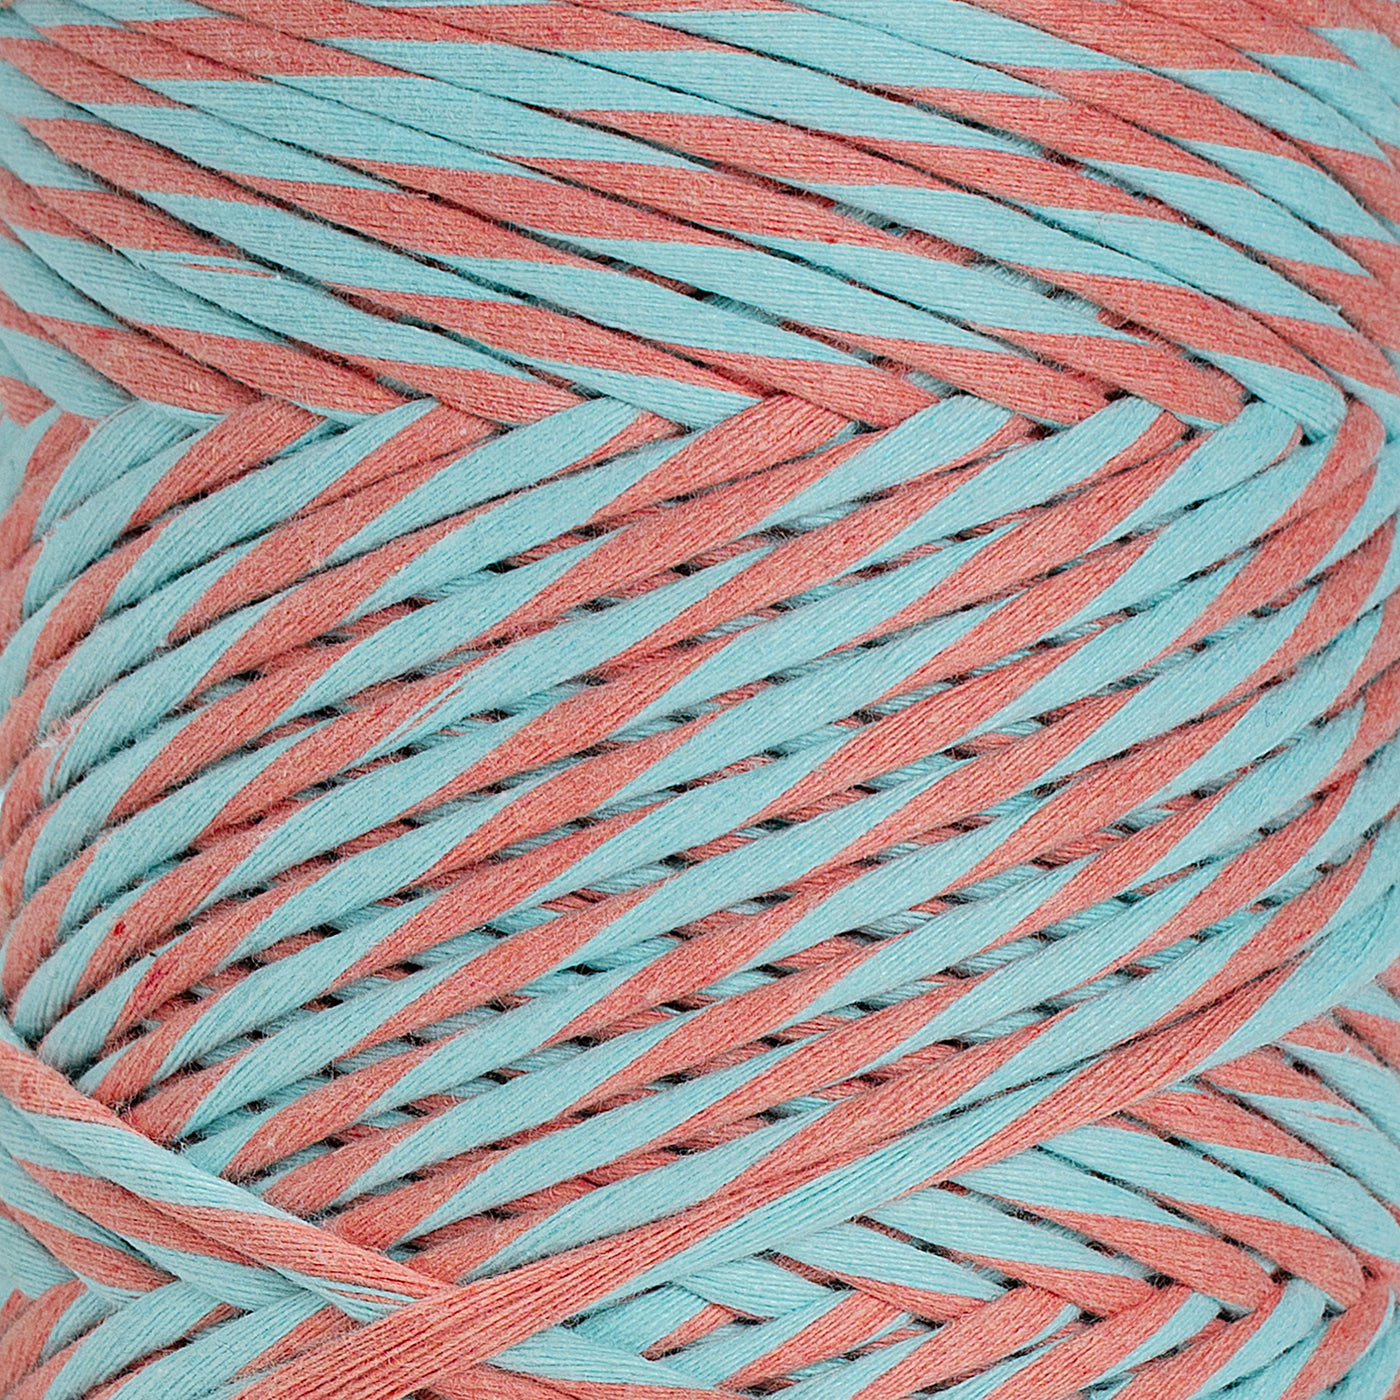 DUAL RECYCLED COTTON MACRAME CORD 4 MM - SINGLE STRAND - BIMINI + FRUIT PUNCH COLOR